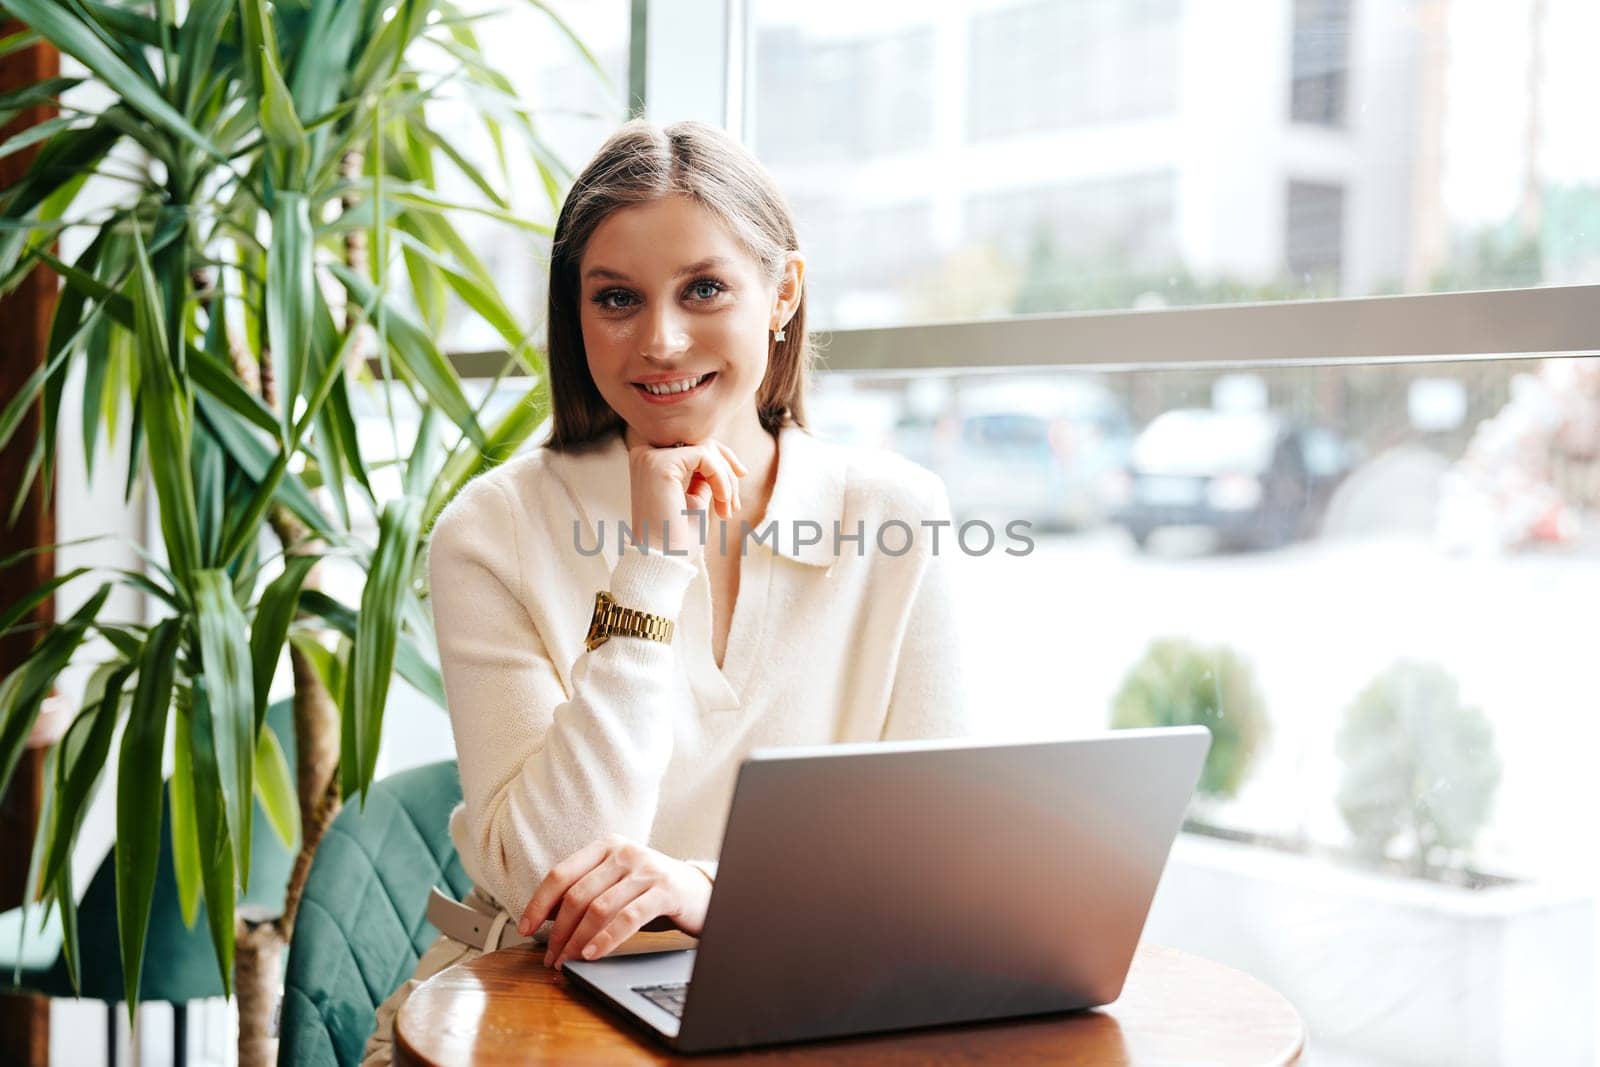 A cheerful young woman is seated at a wooden table in a well-lit cafe, working on her laptop. Her attention is momentarily diverted away from the screen as she smiles towards someone or something, giving off a pleasant and relaxed vibe amidst the indoor greenery that adorns the environment.